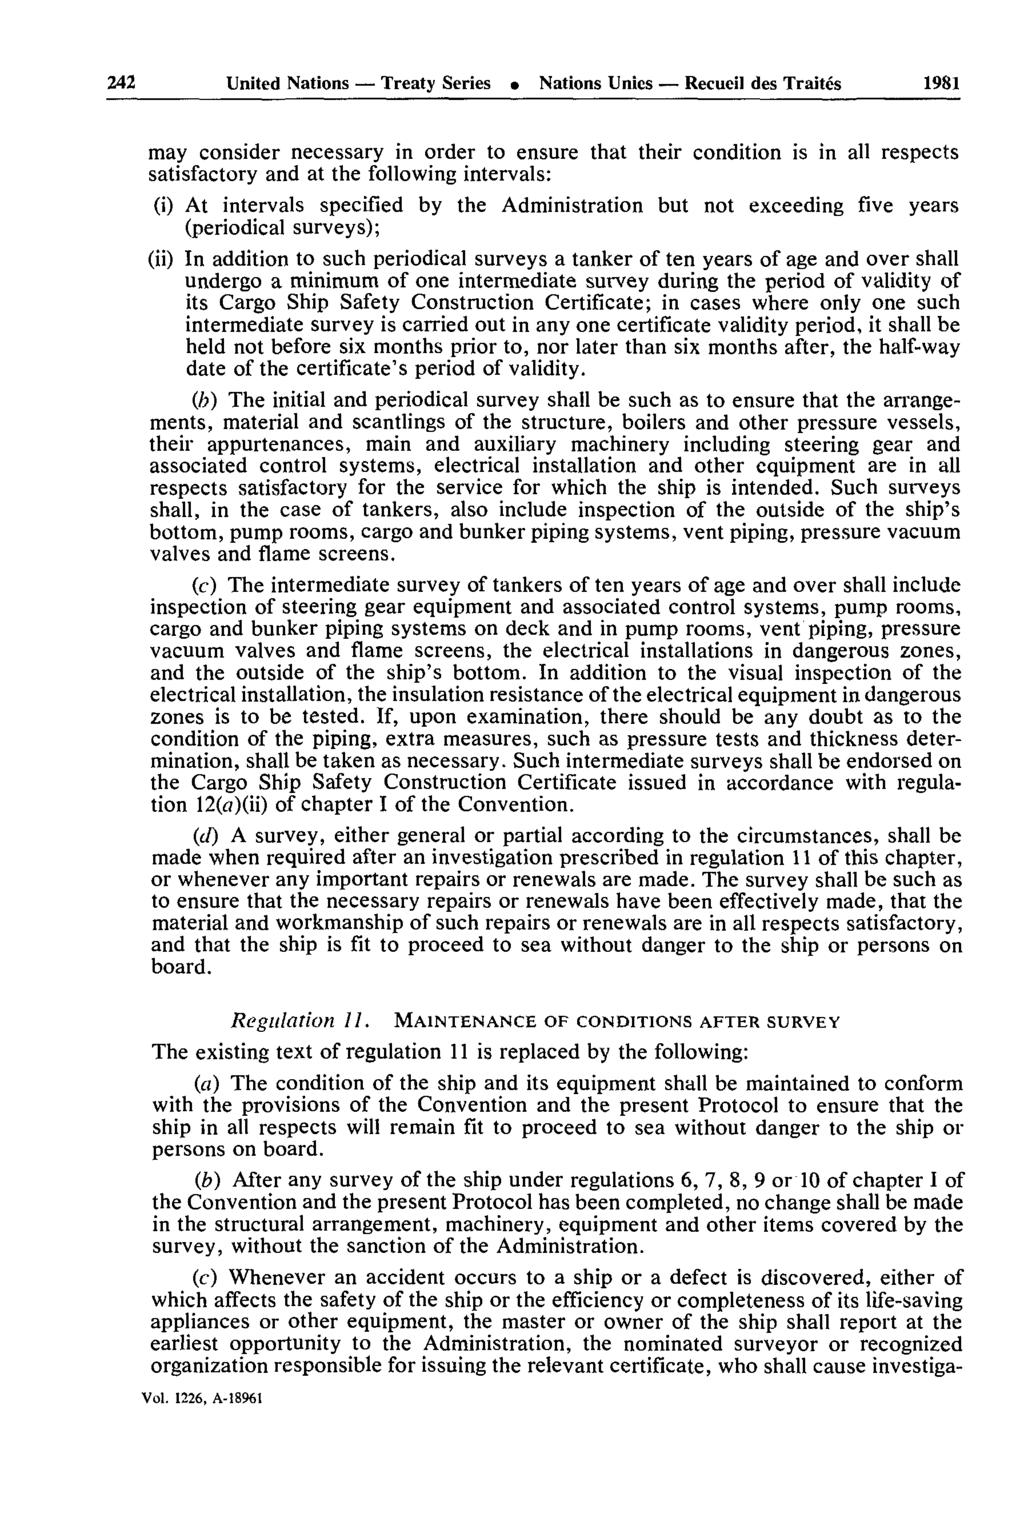 242 United Nations Treaty Series Nations Unies Recueil des Traités 1981 may consider necessary in order to ensure that their condition is in all respects satisfactory and at the following intervals: